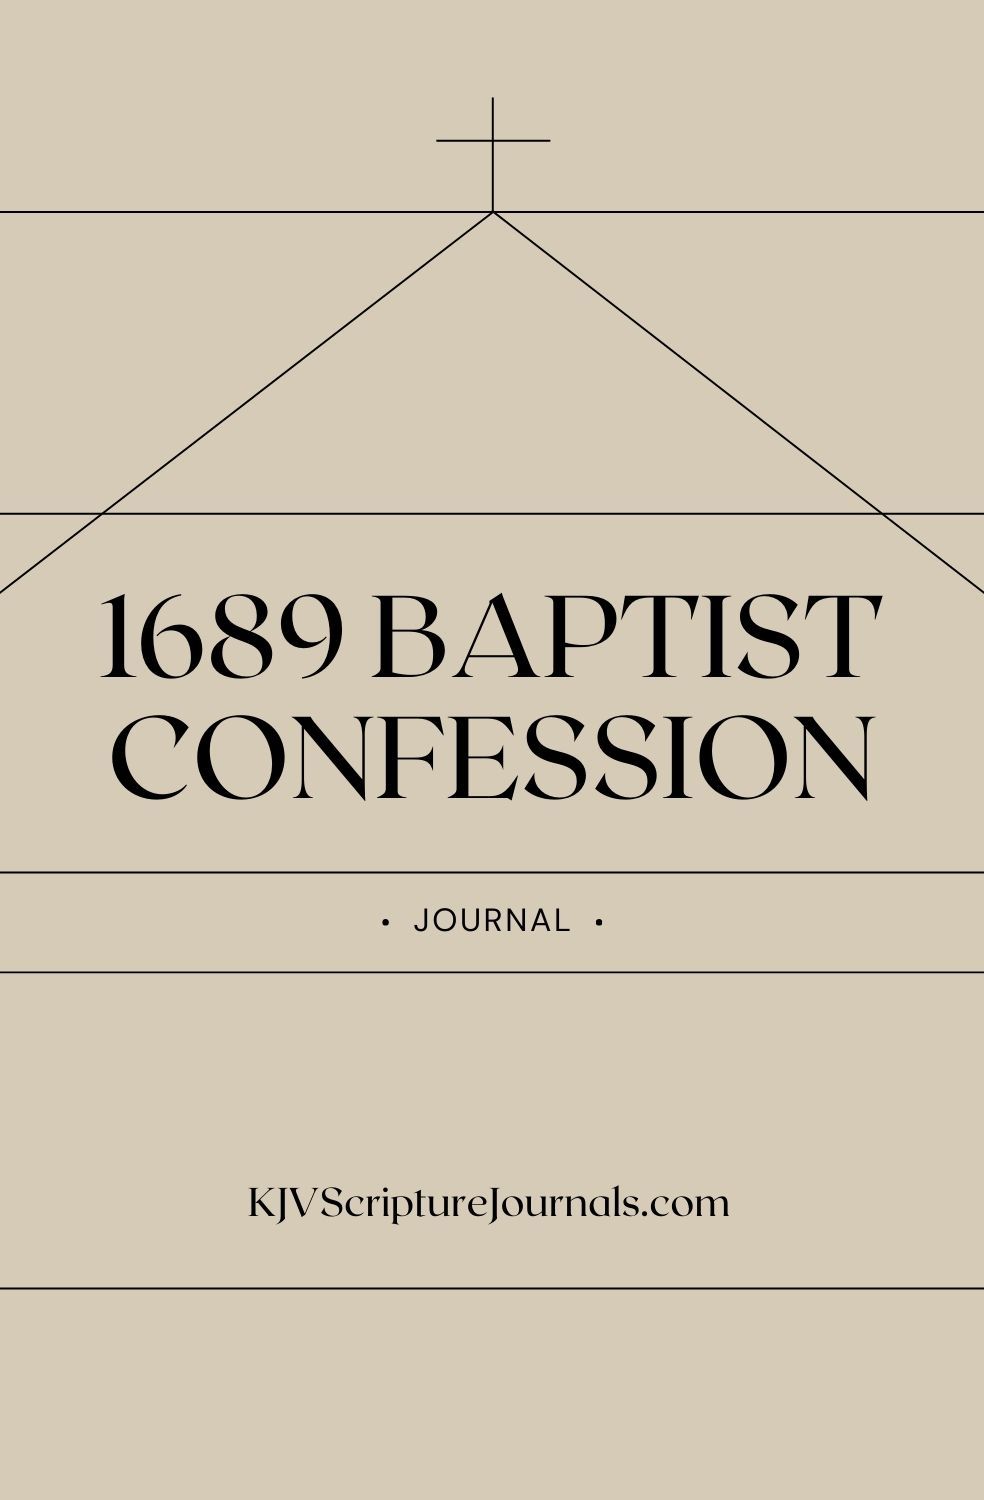 The forthcoming 1689 Baptist Confession Journal